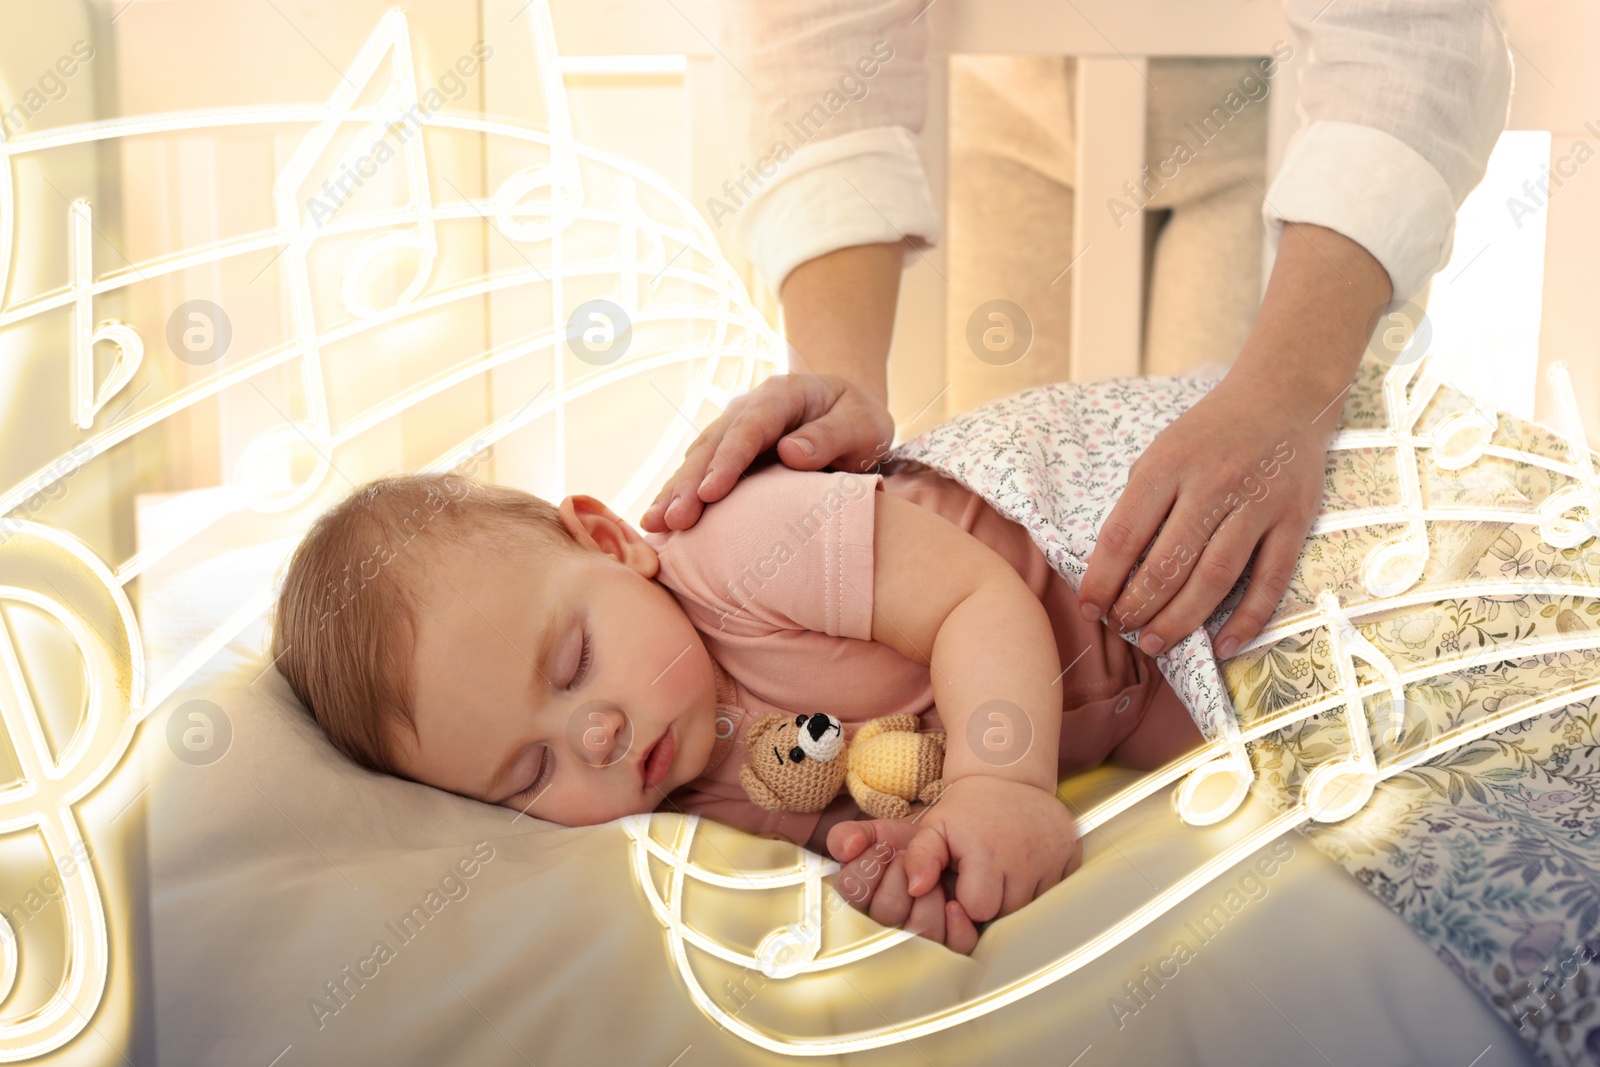 Image of Lullaby songs. Mother covering her sleeping baby with blanket at home. Illustration of flying music notes